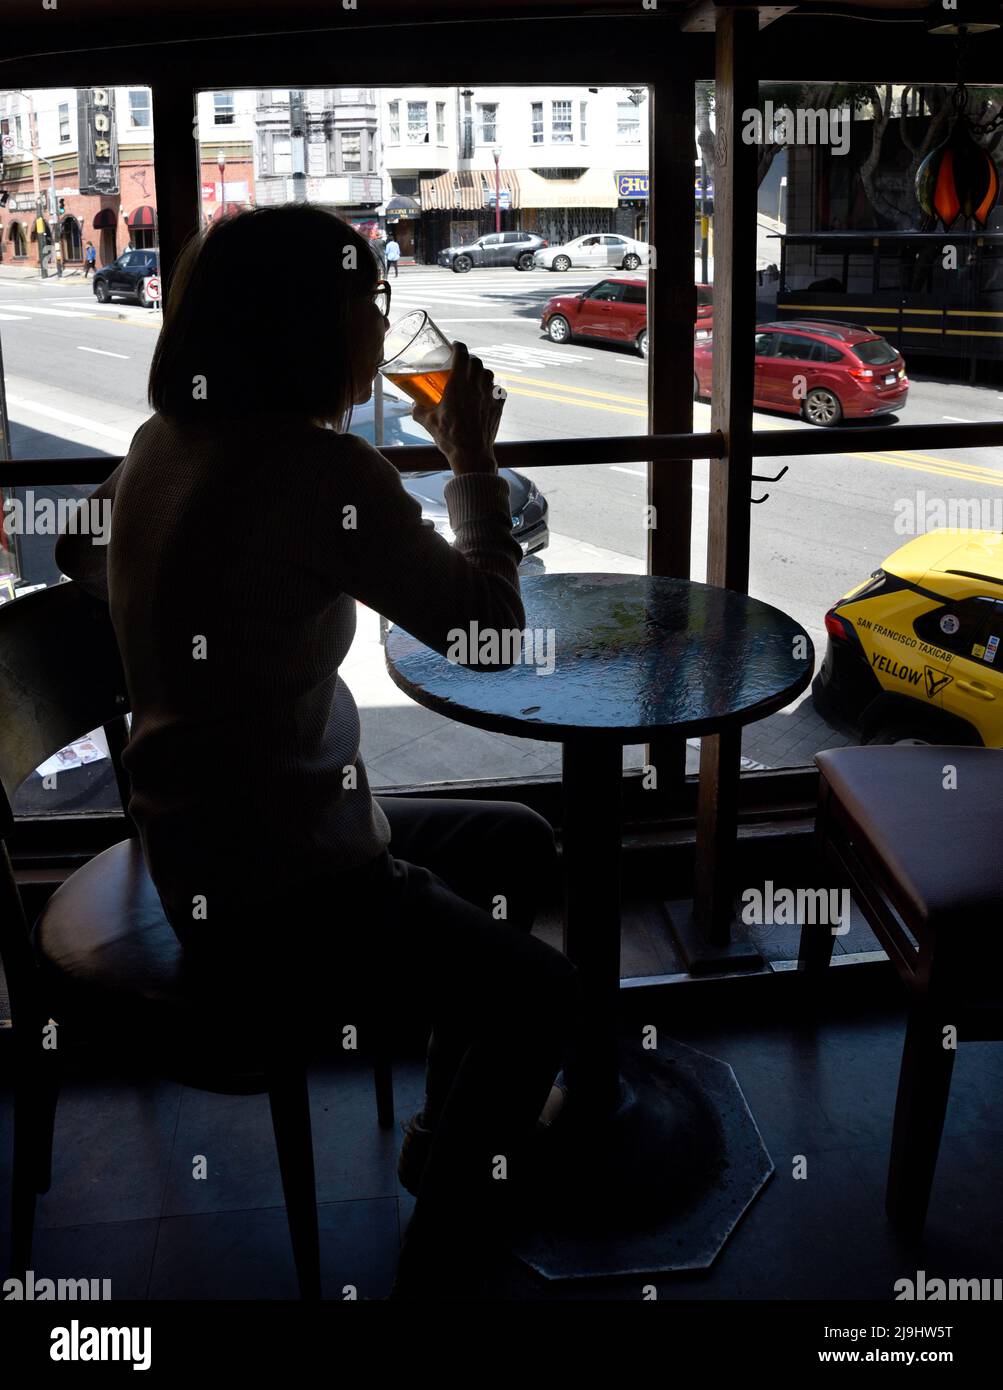 A woman enjoys a beer at the Vesuvio Cafe, a landmark American bar in the North Beach section of San Francisco, California. Stock Photo